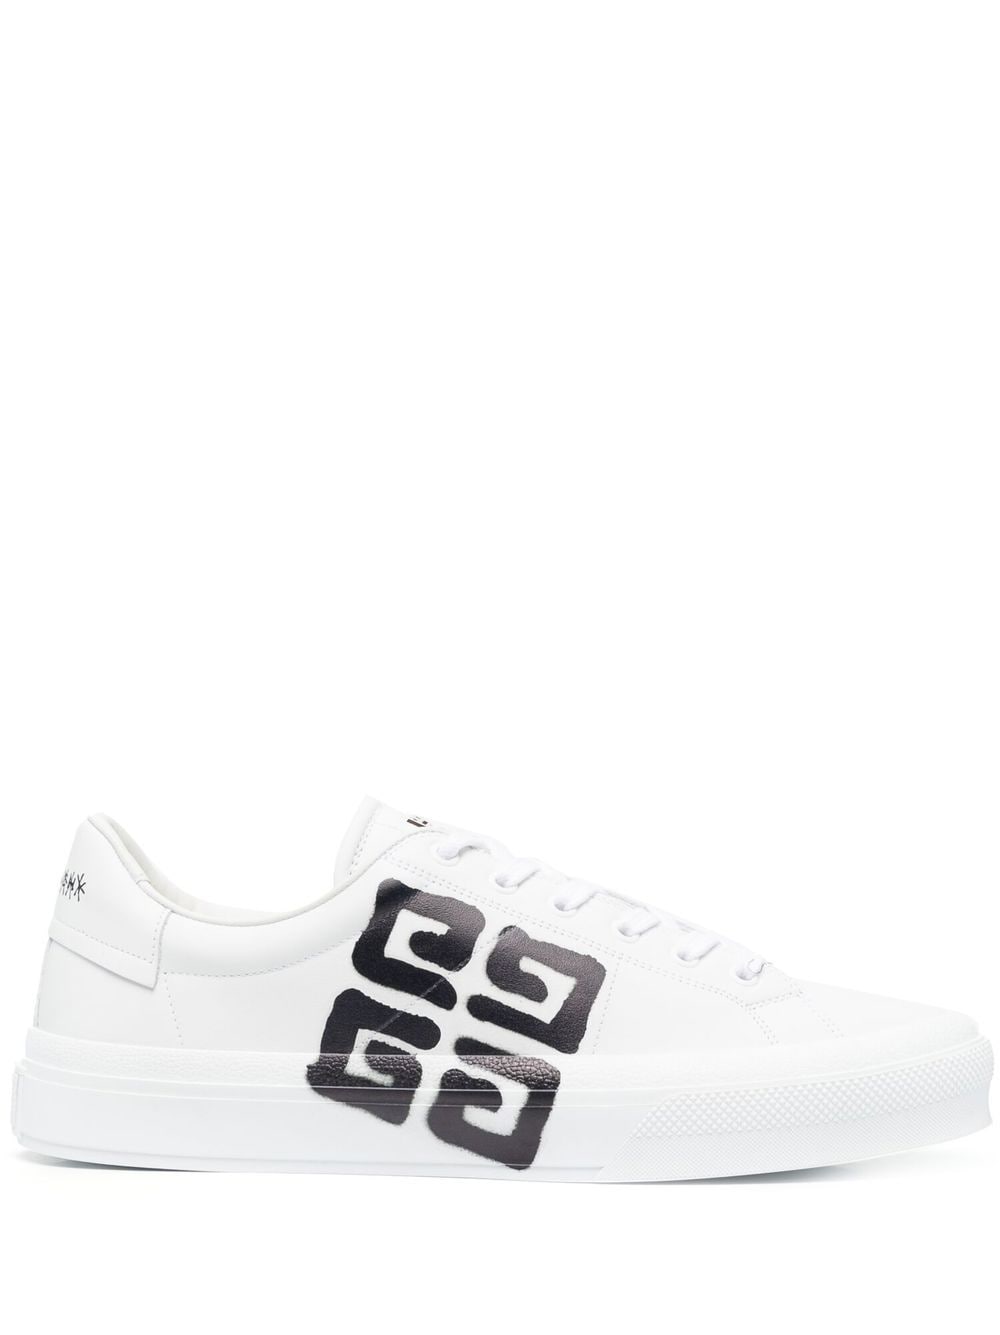 Givenchy City Sport 4g Sneakers In White